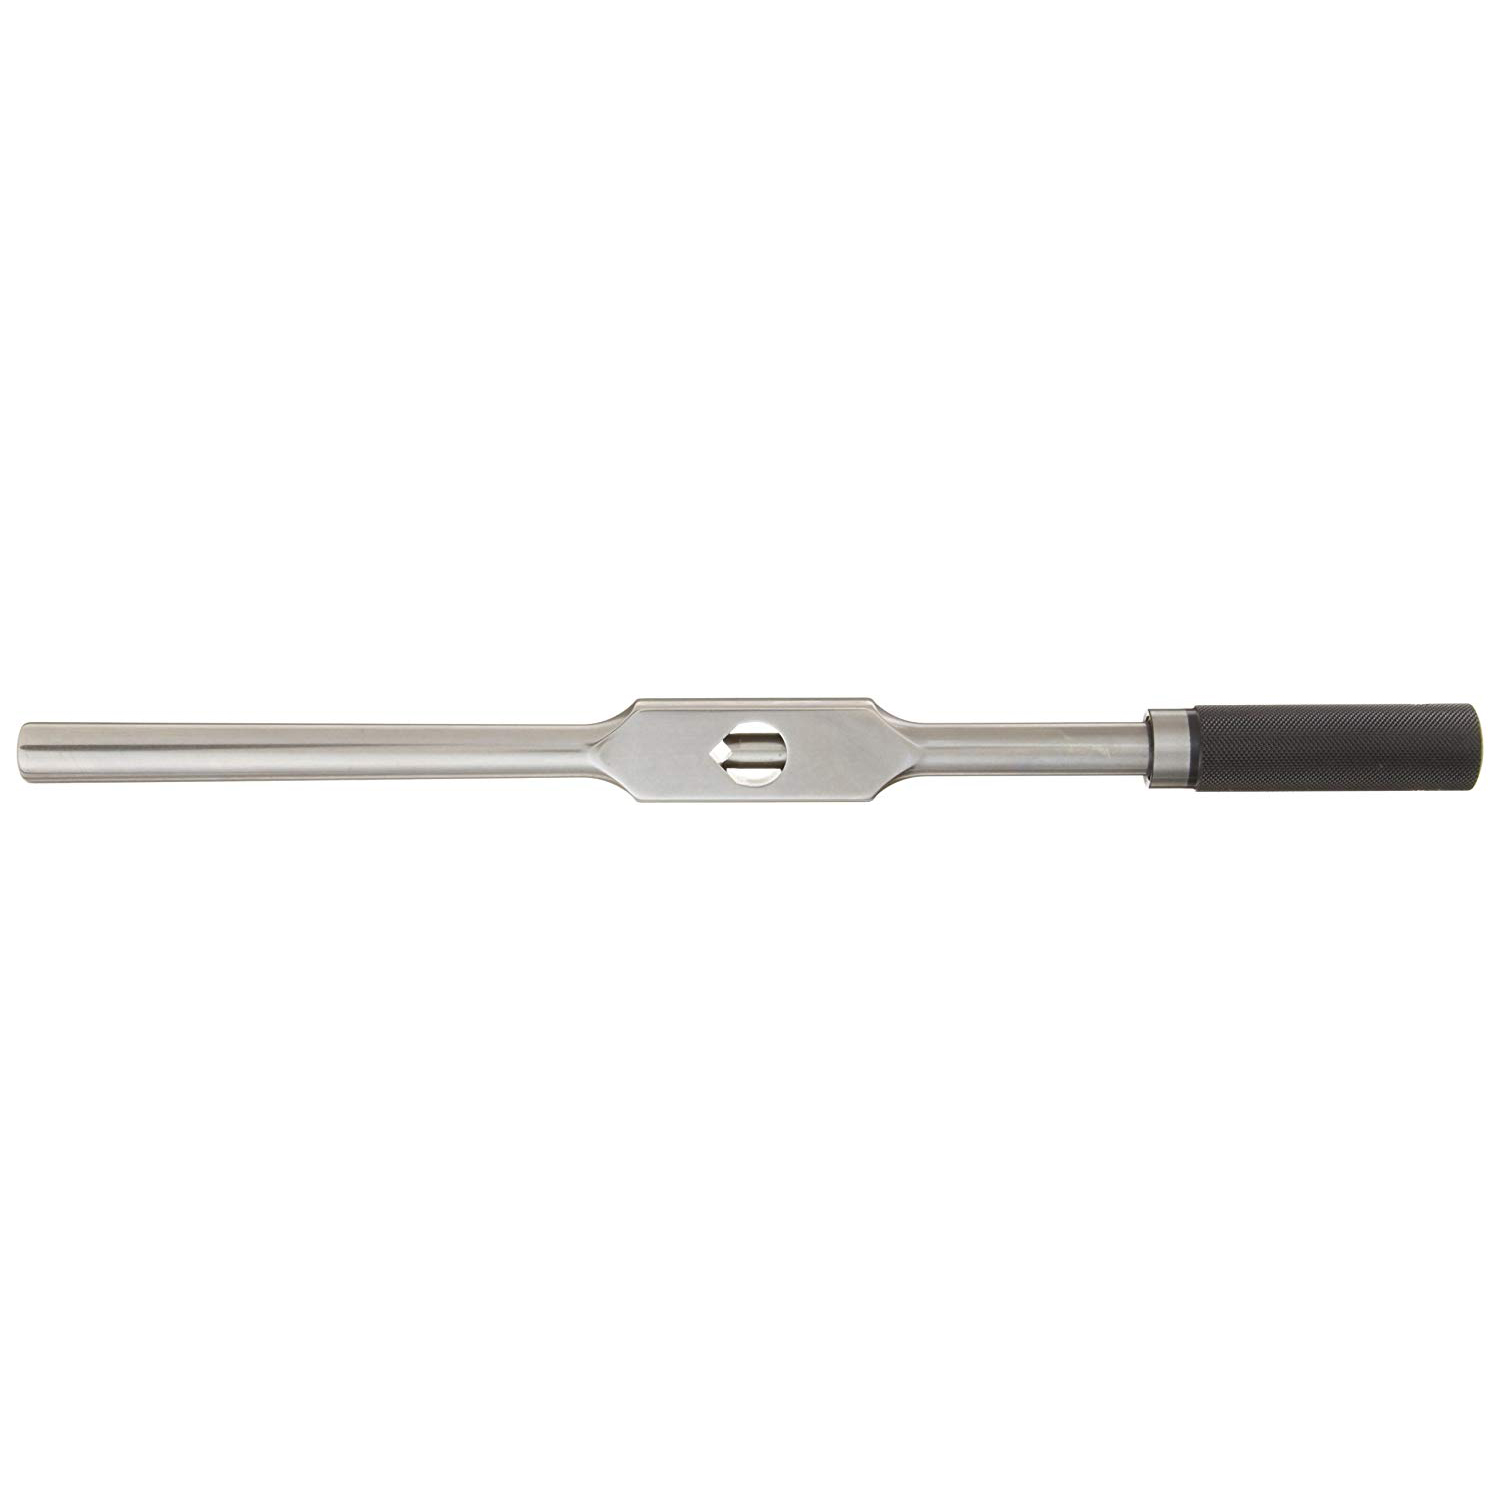 TAP WRENCH 5/16-3/4" 91D 50422